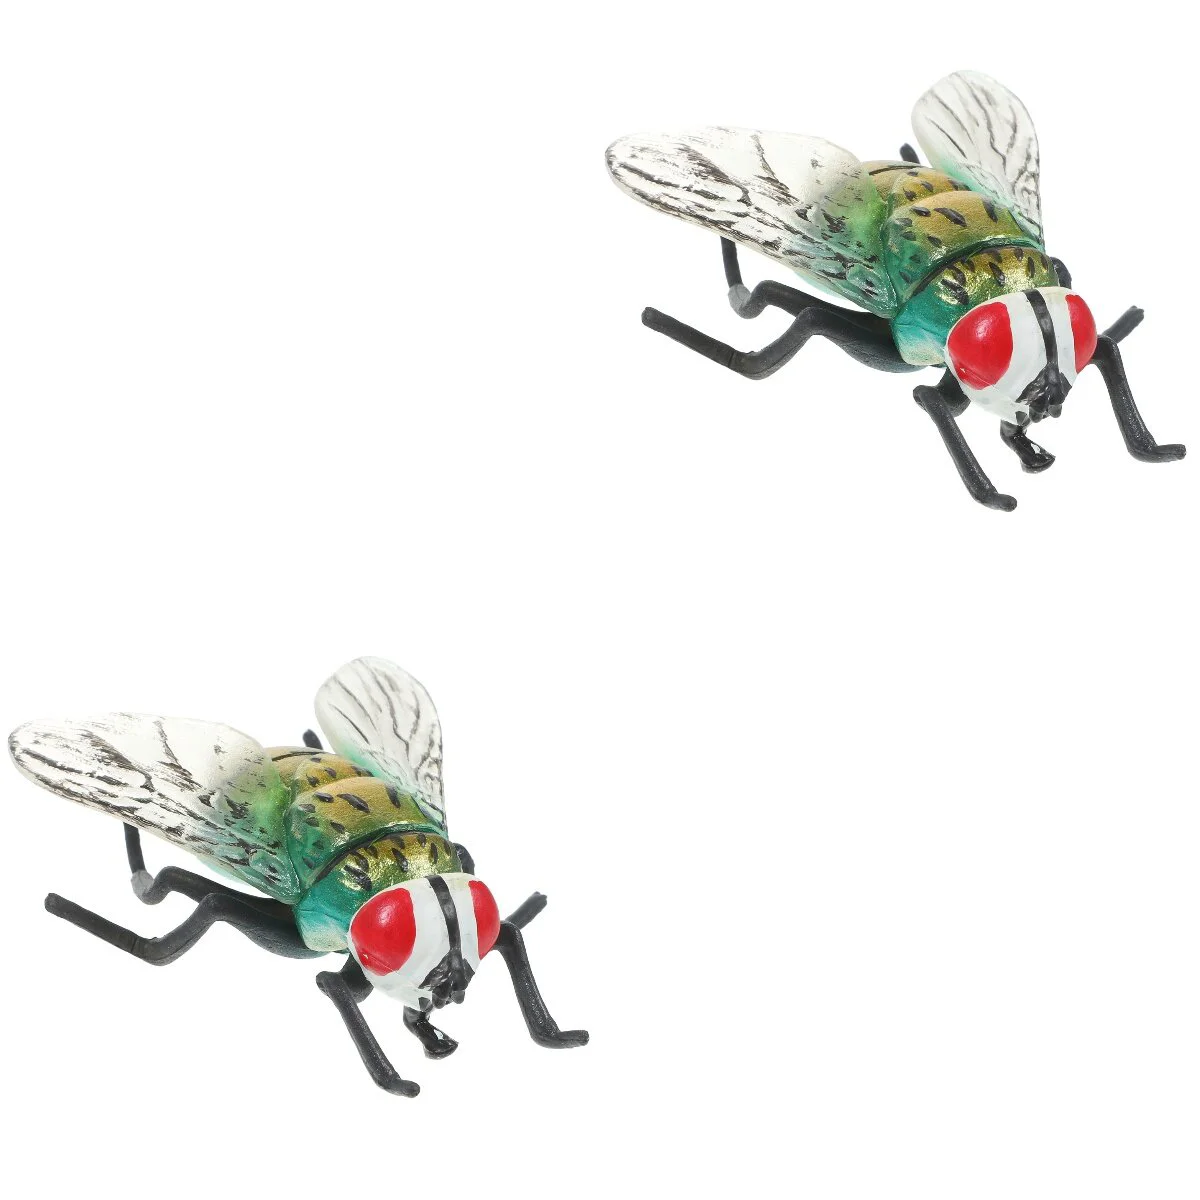 

2 Count Kids Toys Accessories Realistic Plastic Blowfly Housefly Model Small Cognition Plaything Figurine Fake Insect Child